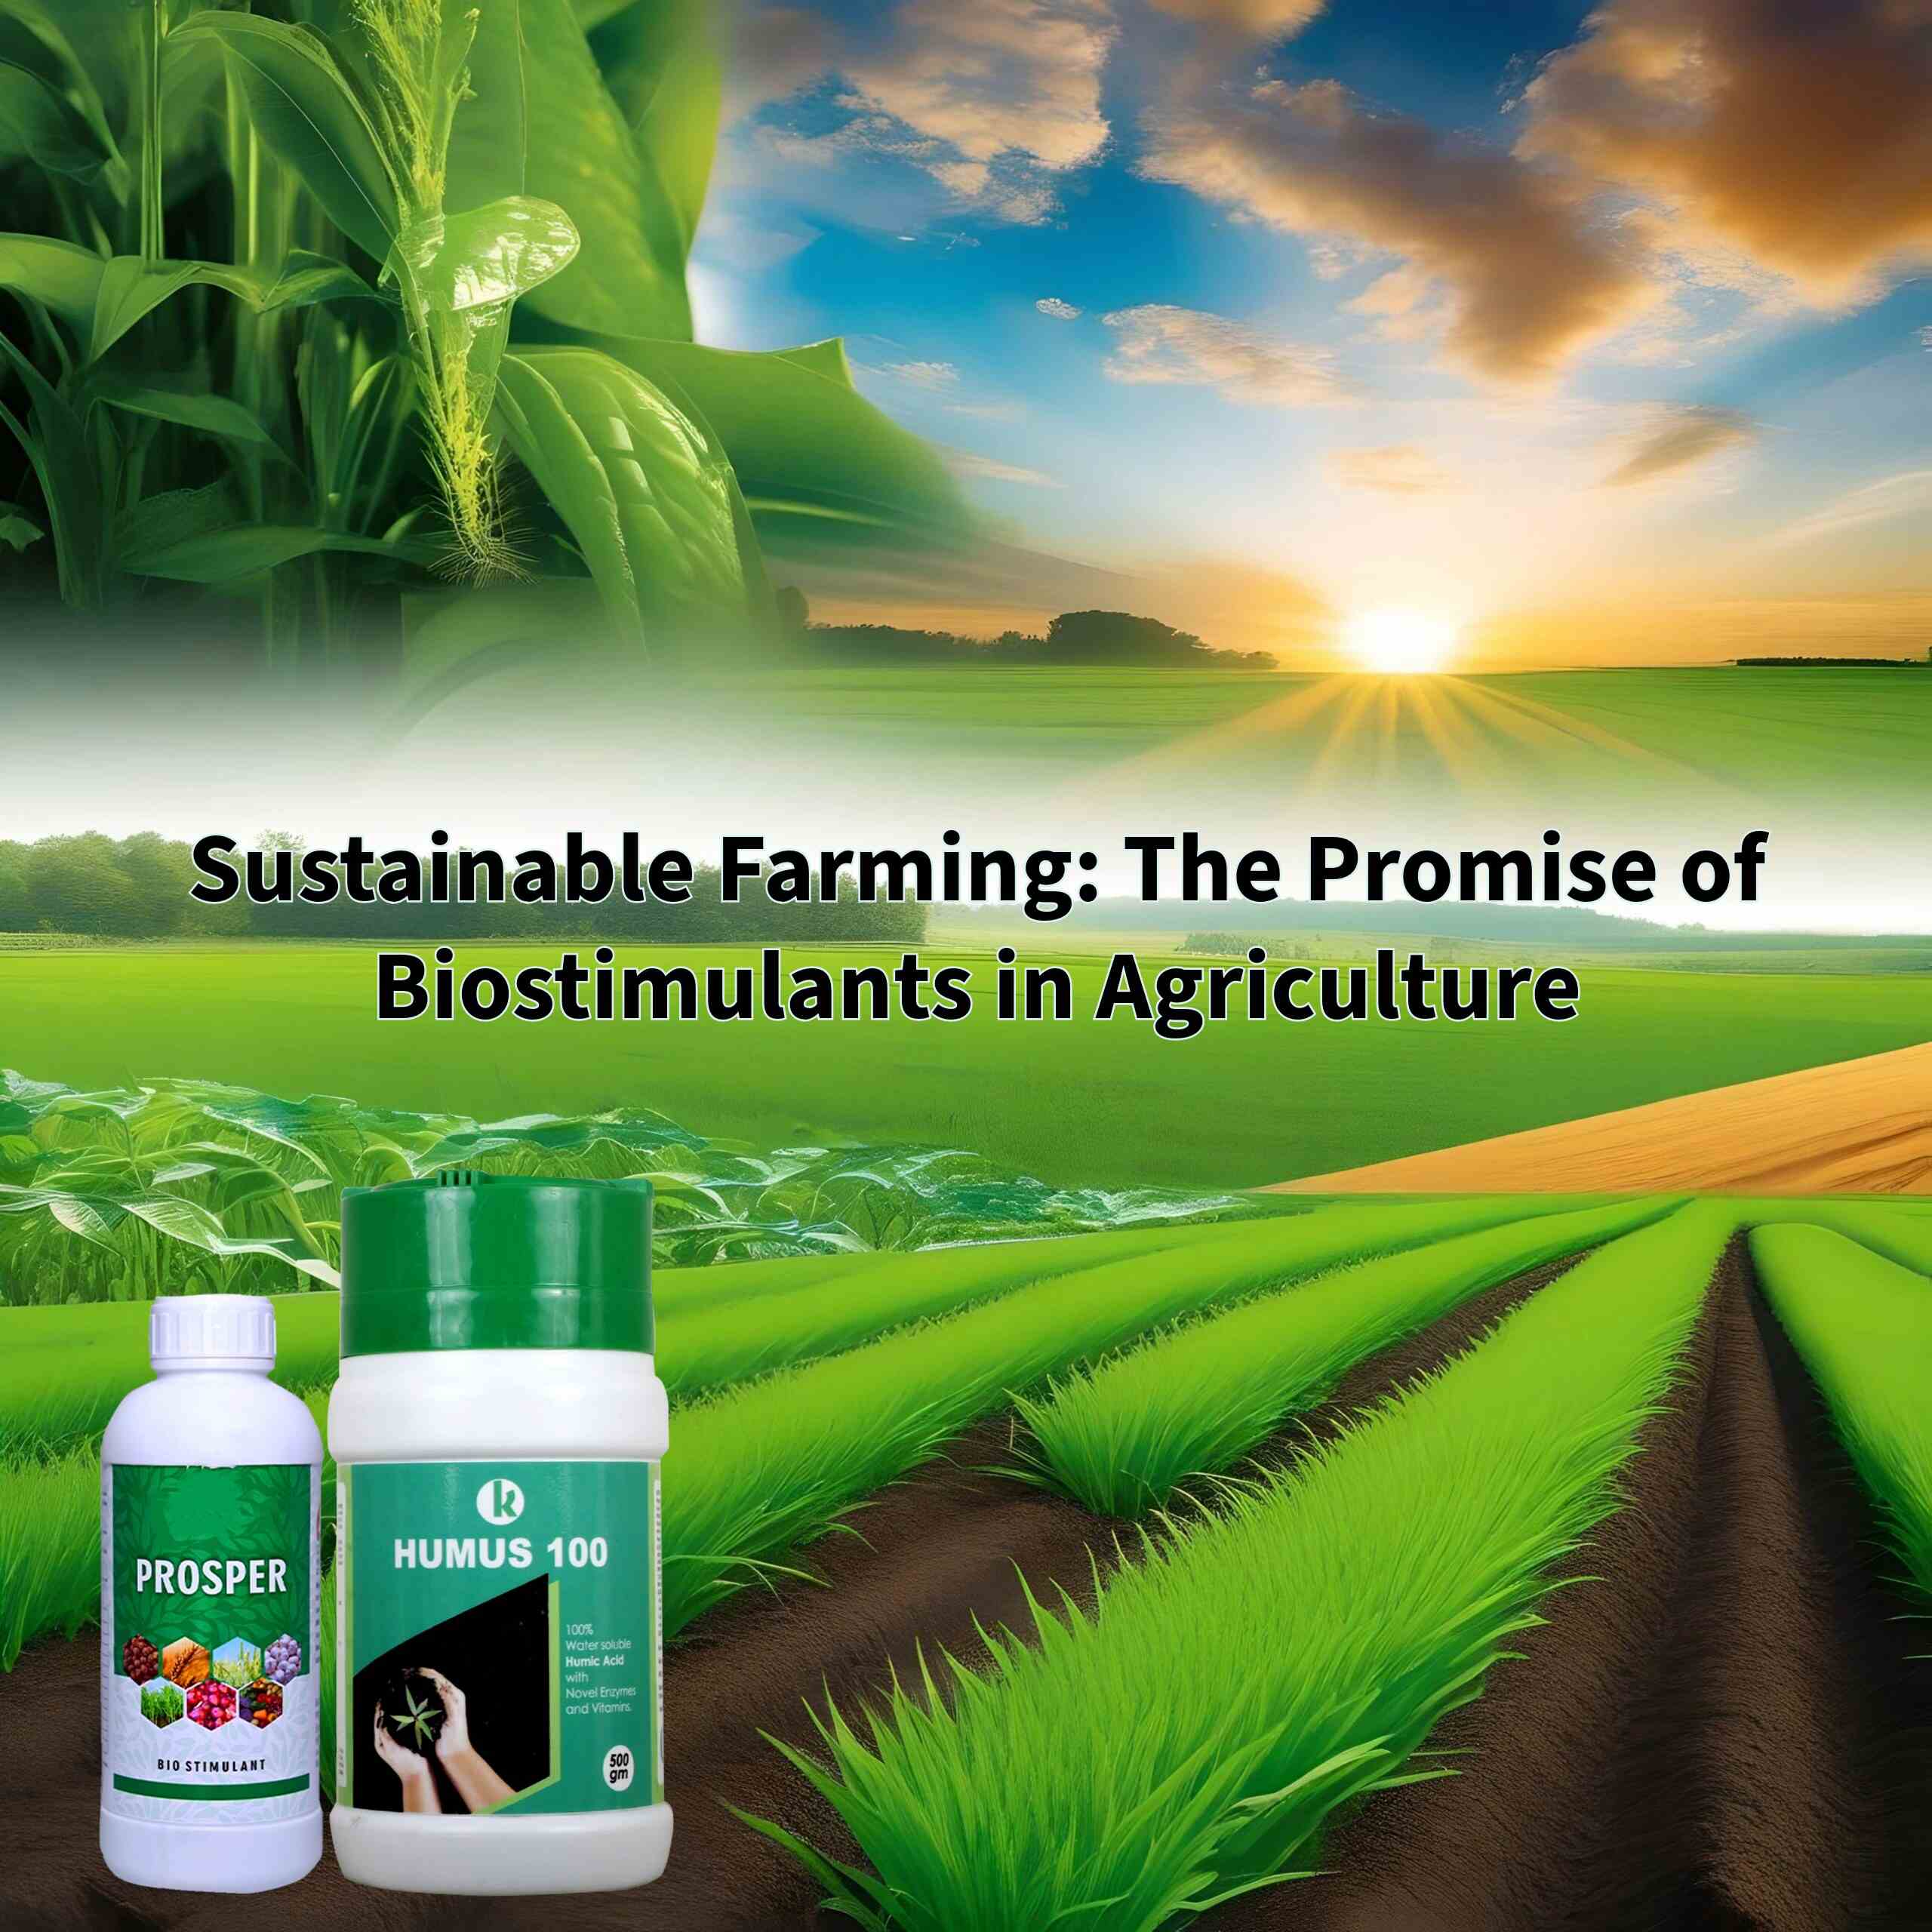 Sustainable Farming: The Promise of Biostimulants in Agriculture